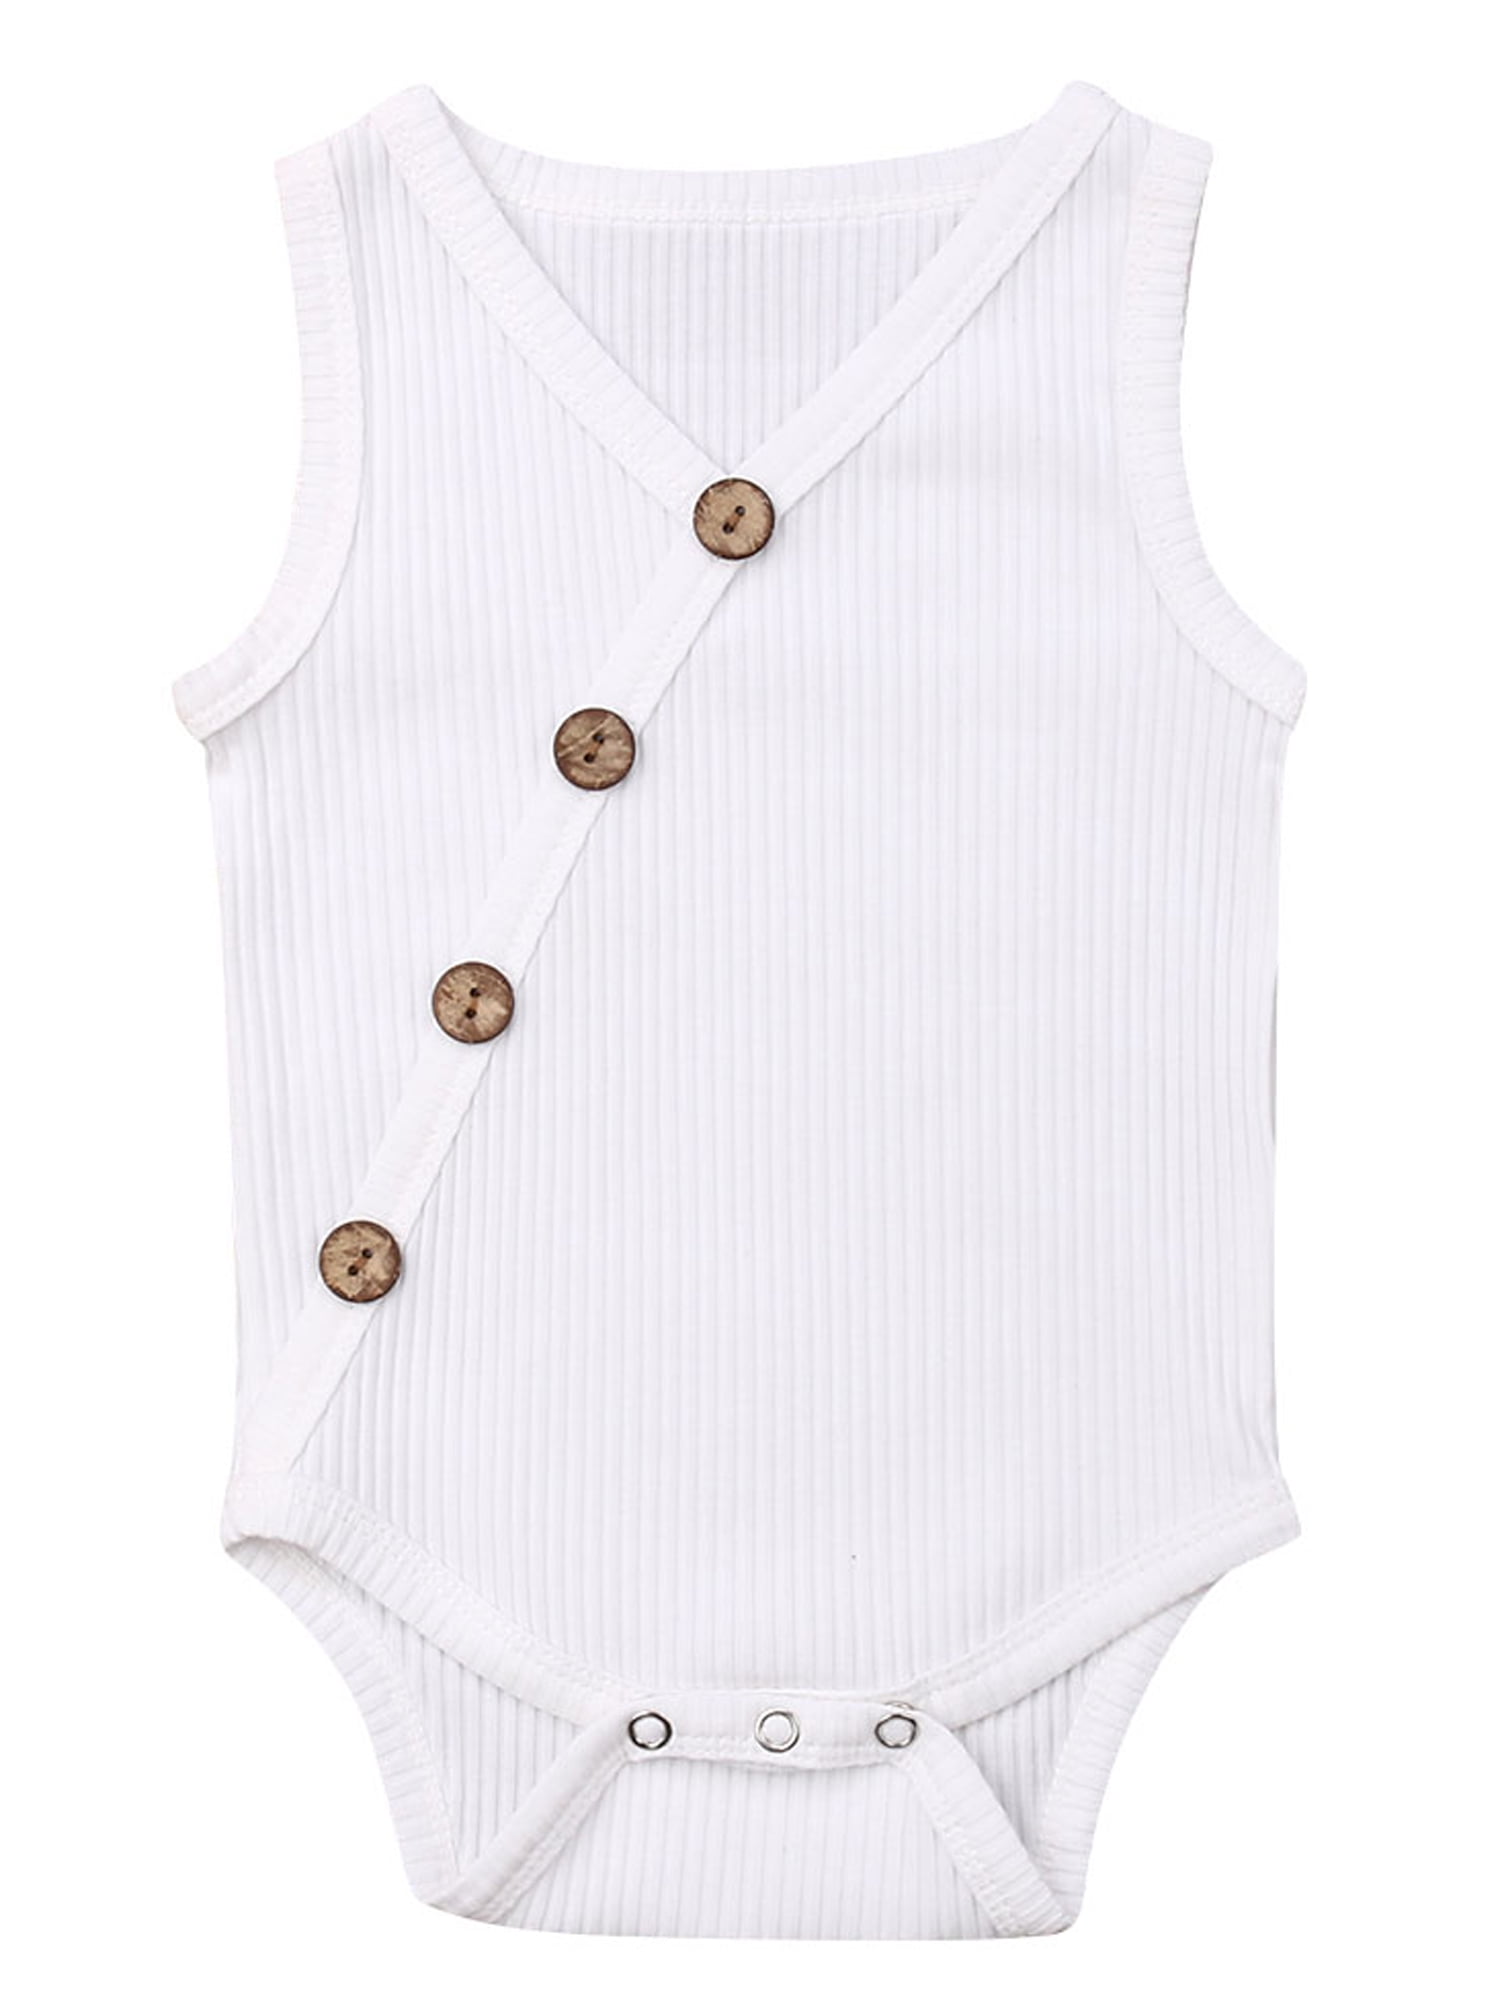 Details about   Toddler Infant Baby Girls Sleeveless Solid Cotton Soft Romper Bodysuit Clothes